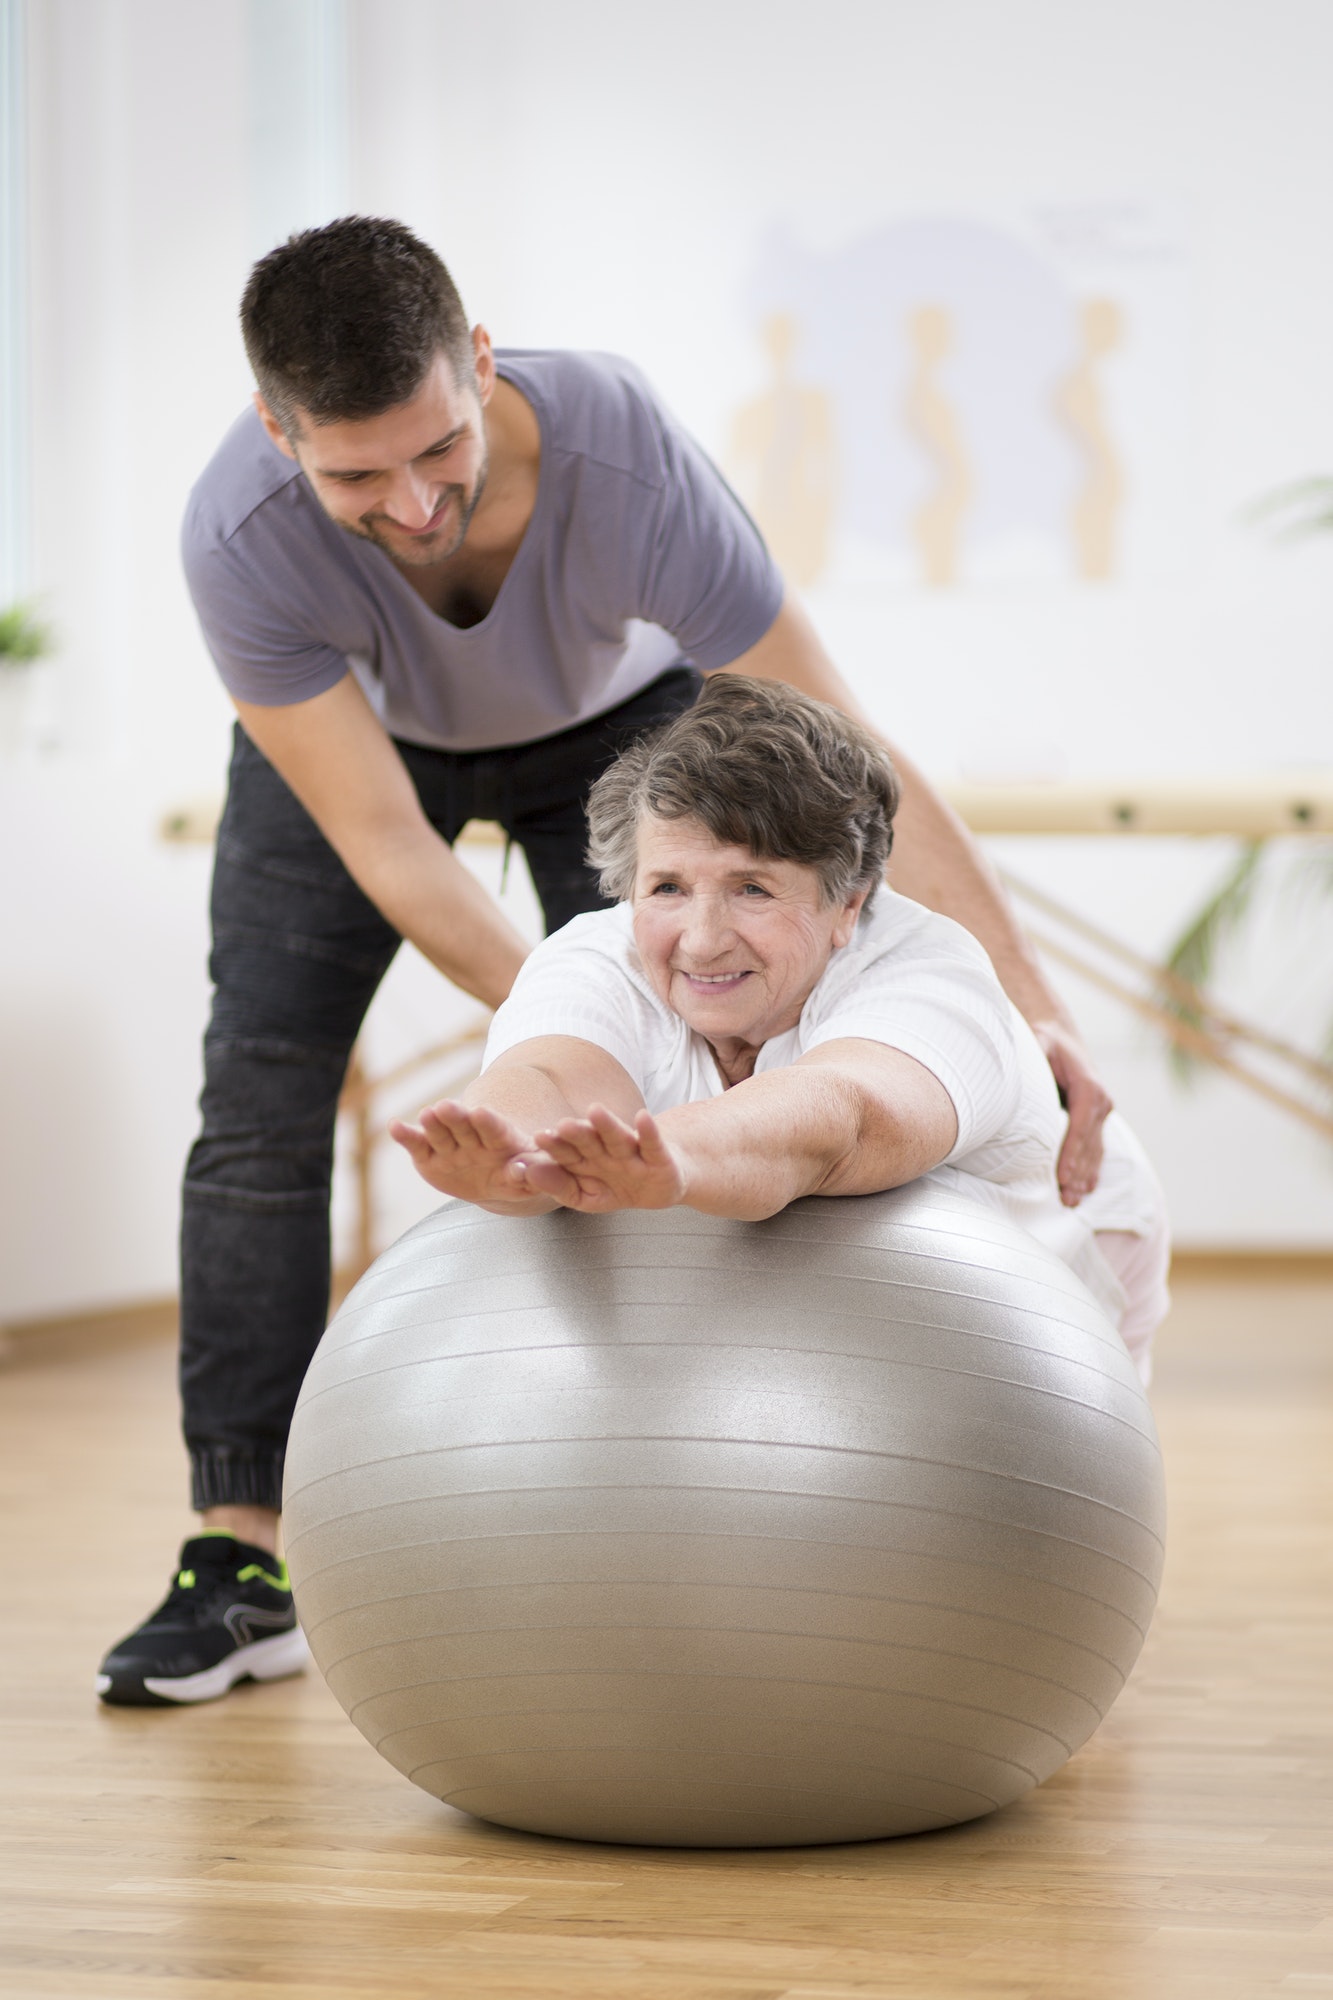 Smiling physiotherapy student helping senior woman lay on the exercising ball during rehabilitation